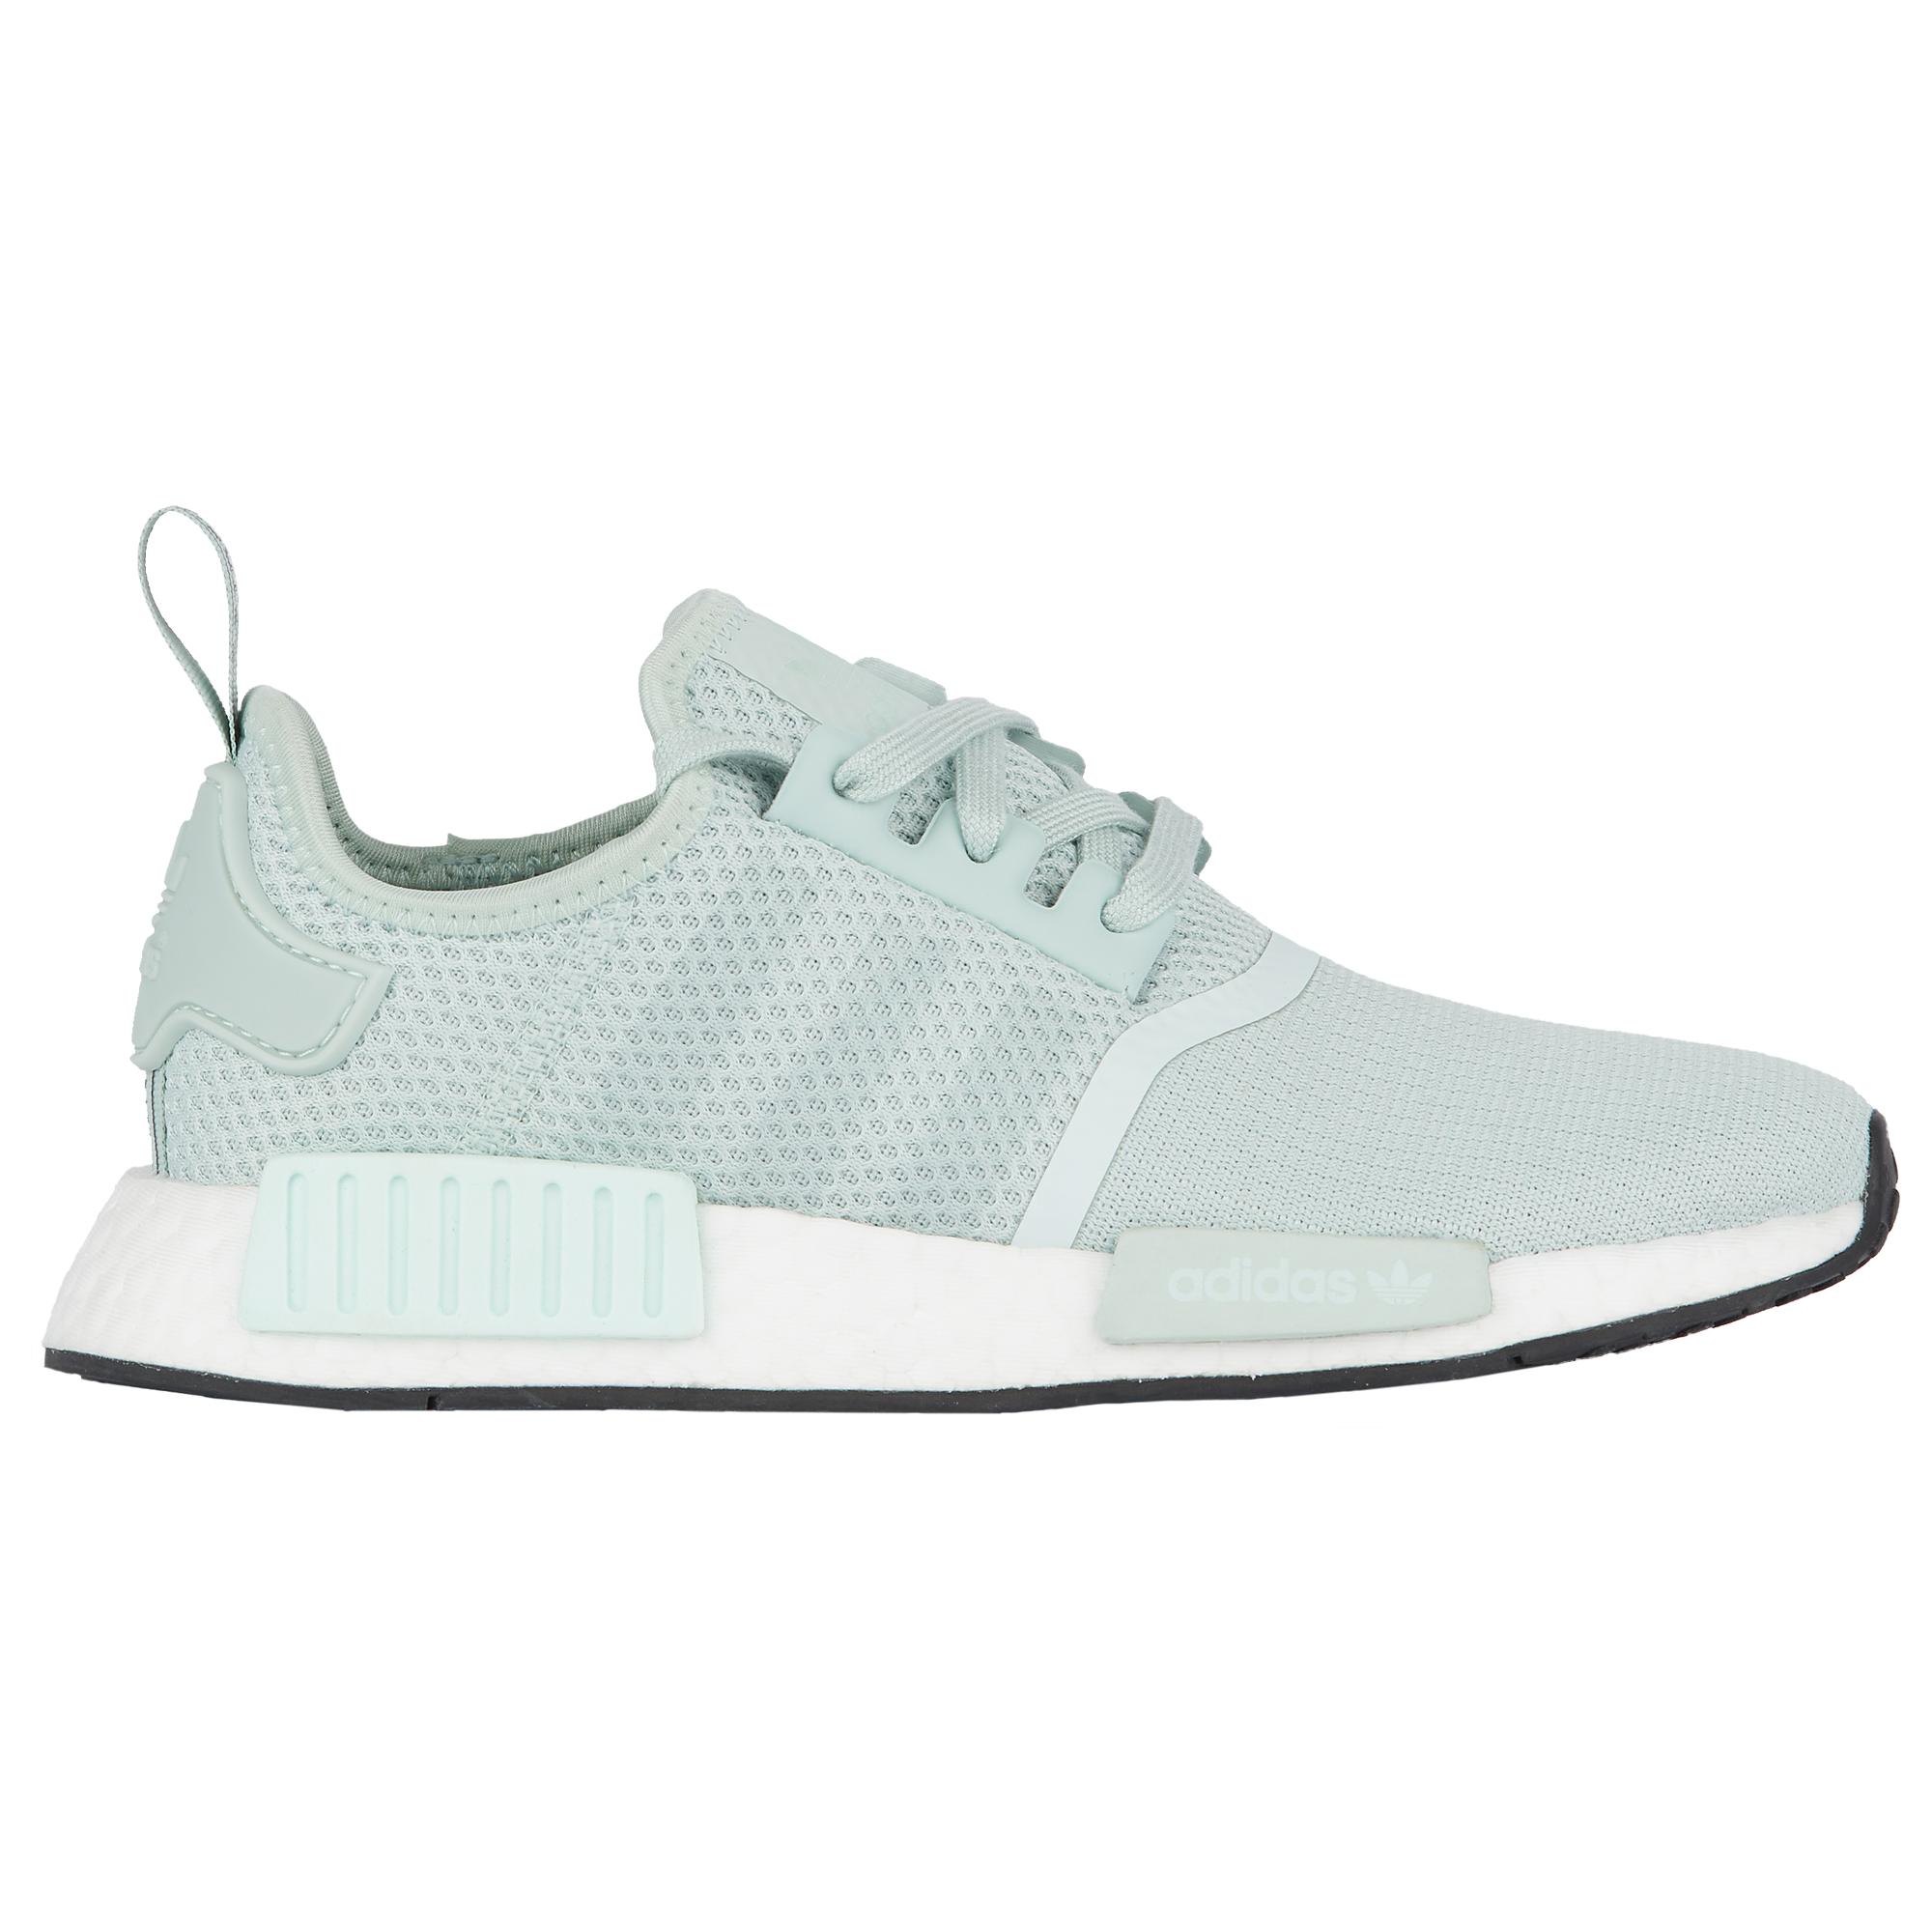 nmd_r1 shoes vapour green